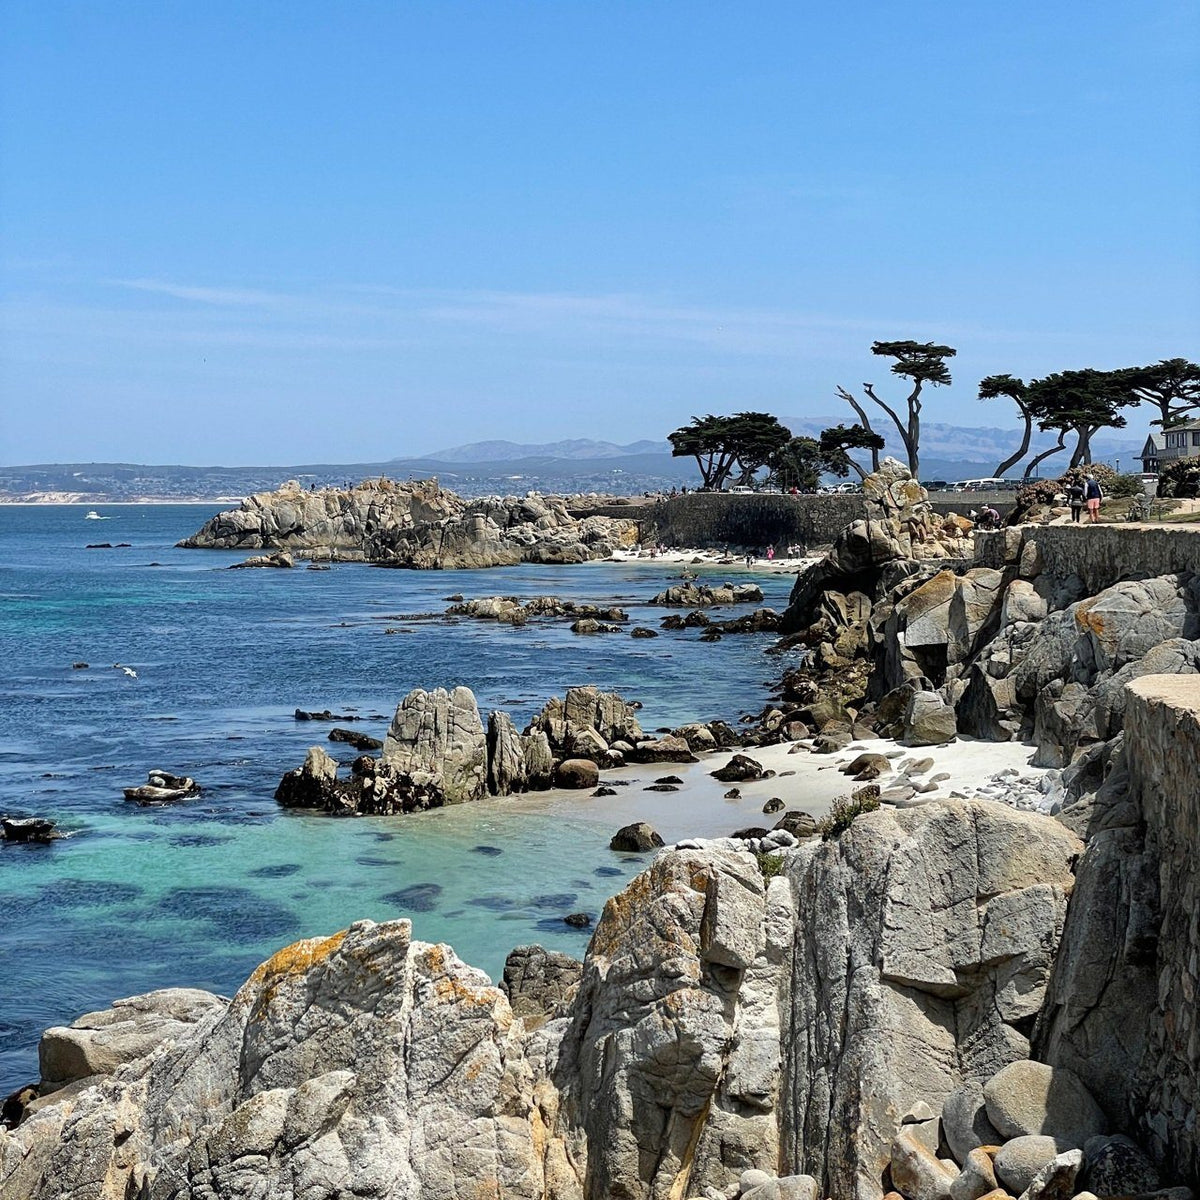 A trip up the coast to Monterey